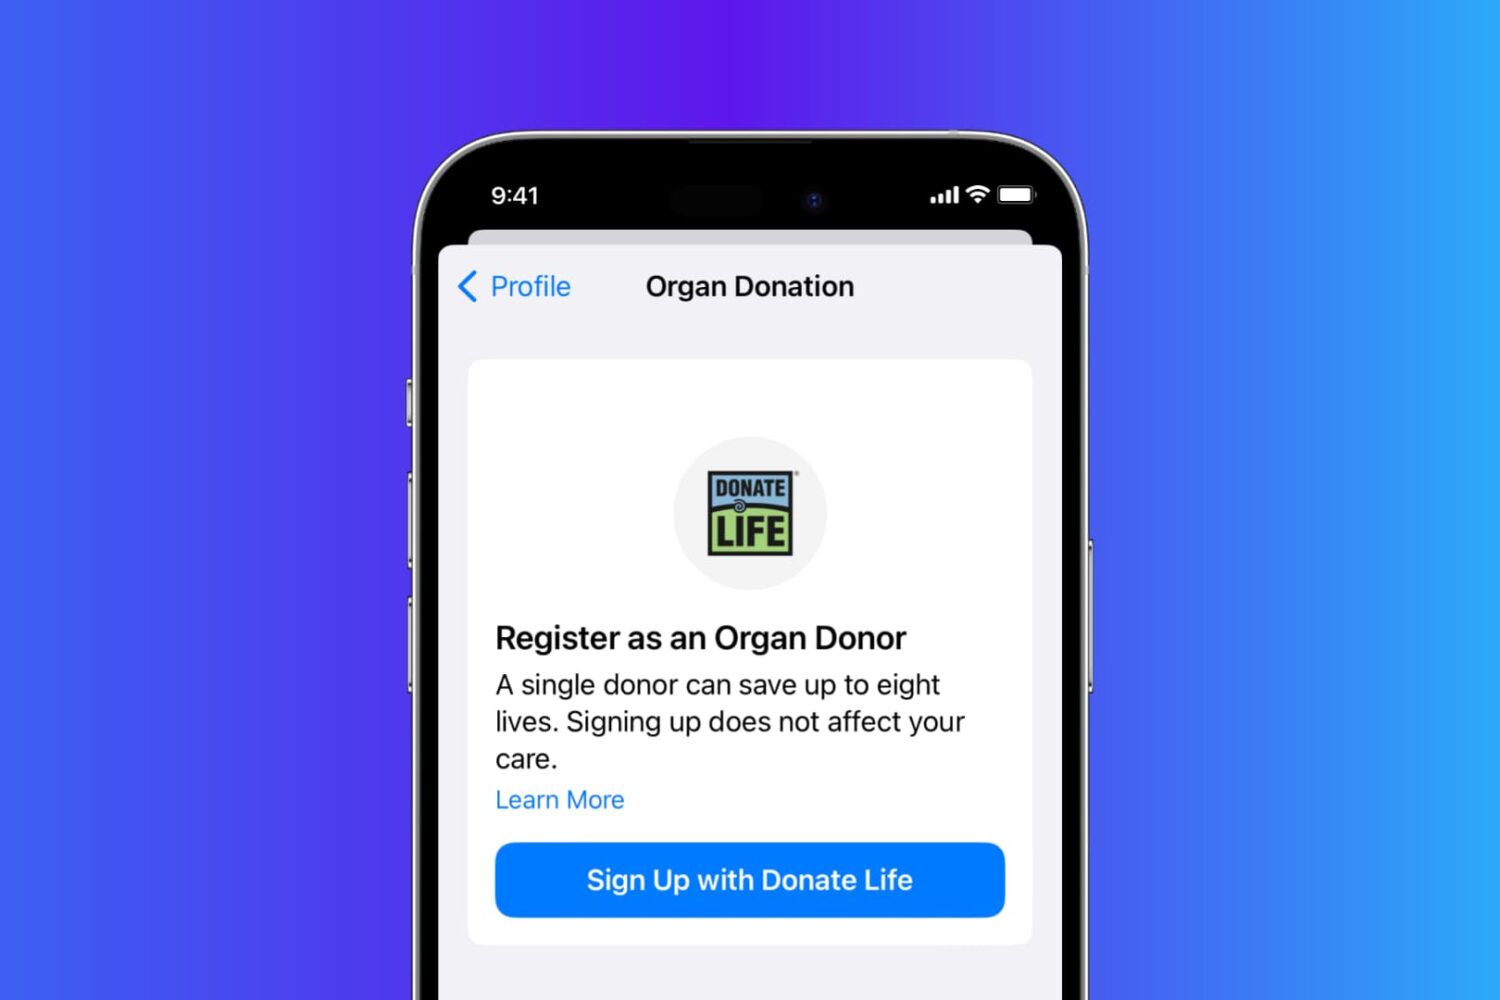 Register for Organ donation on your iPhone